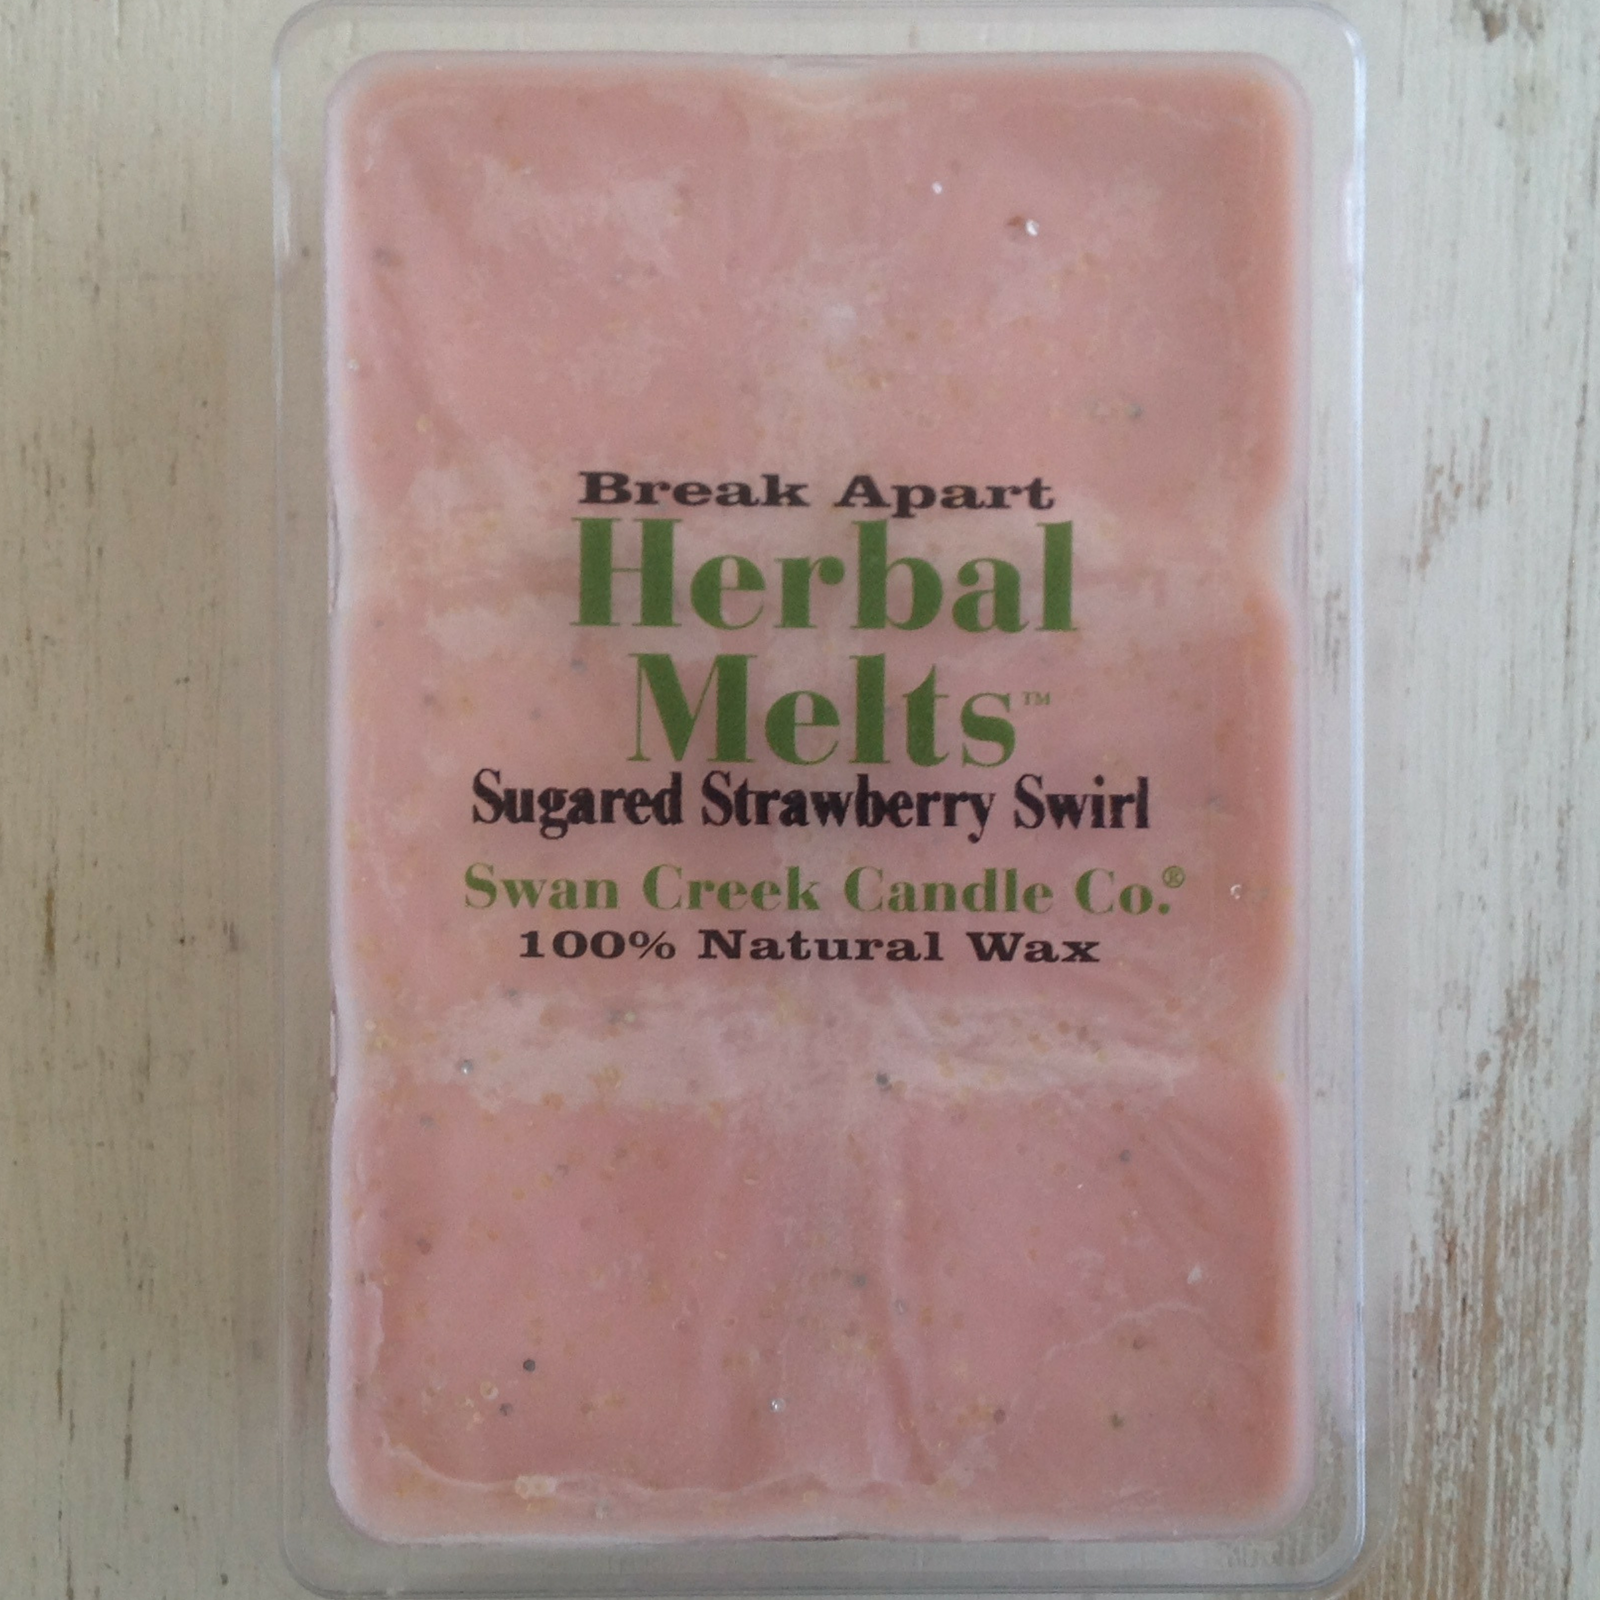 Swan Creek Candle Company Herbal Drizzle Wax Melts Sugared Strawberry Swirl